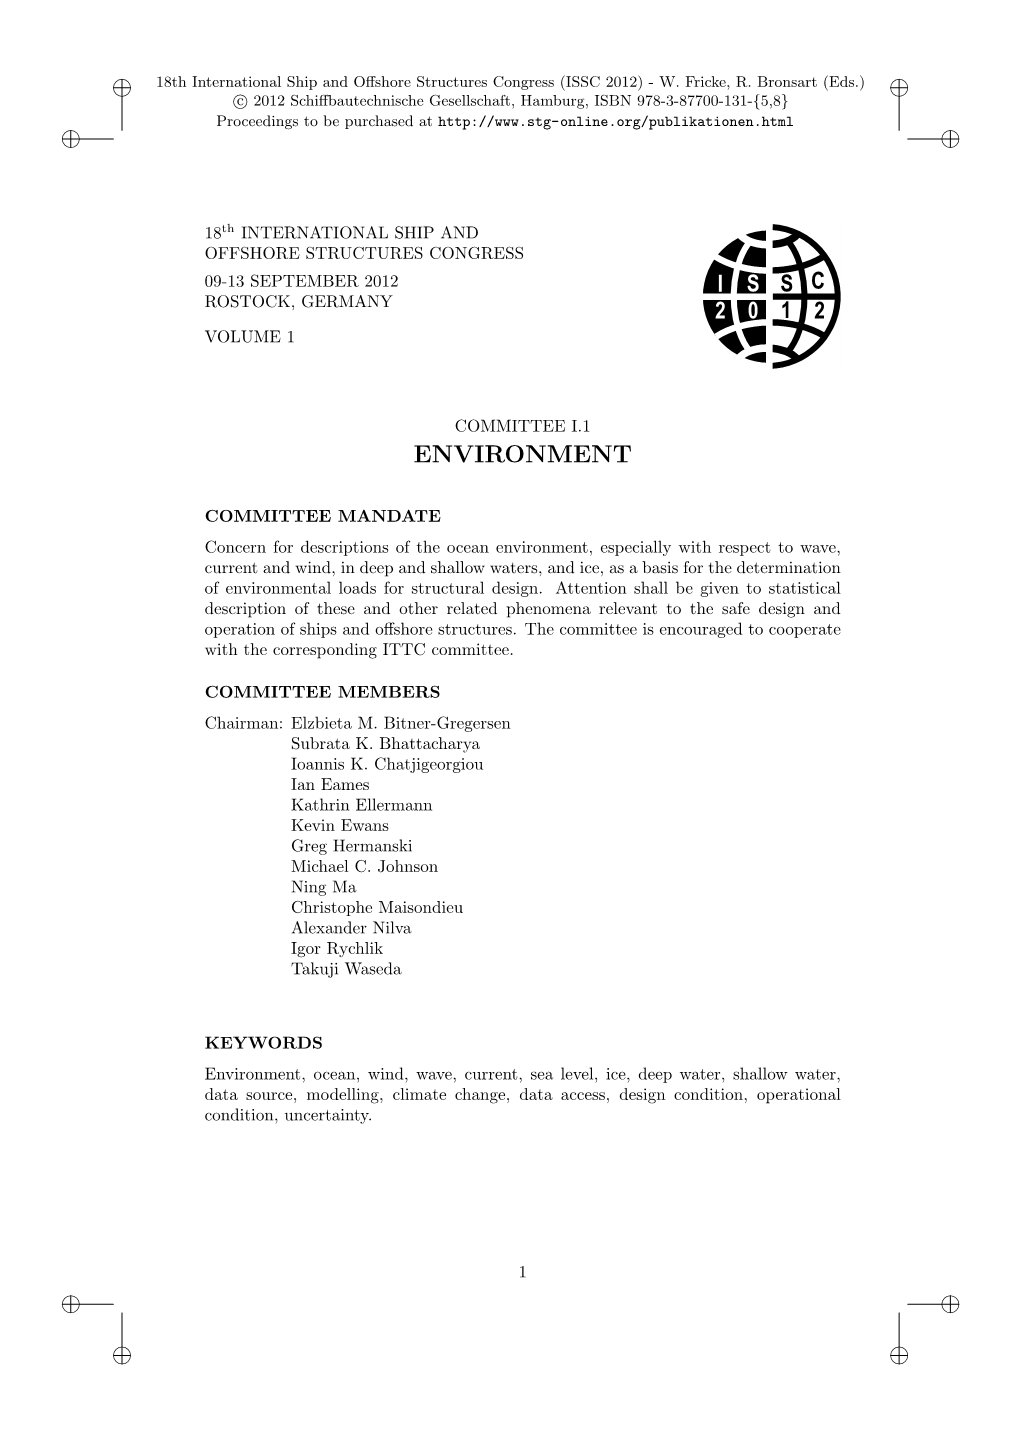 Committee I.1: Environment 3